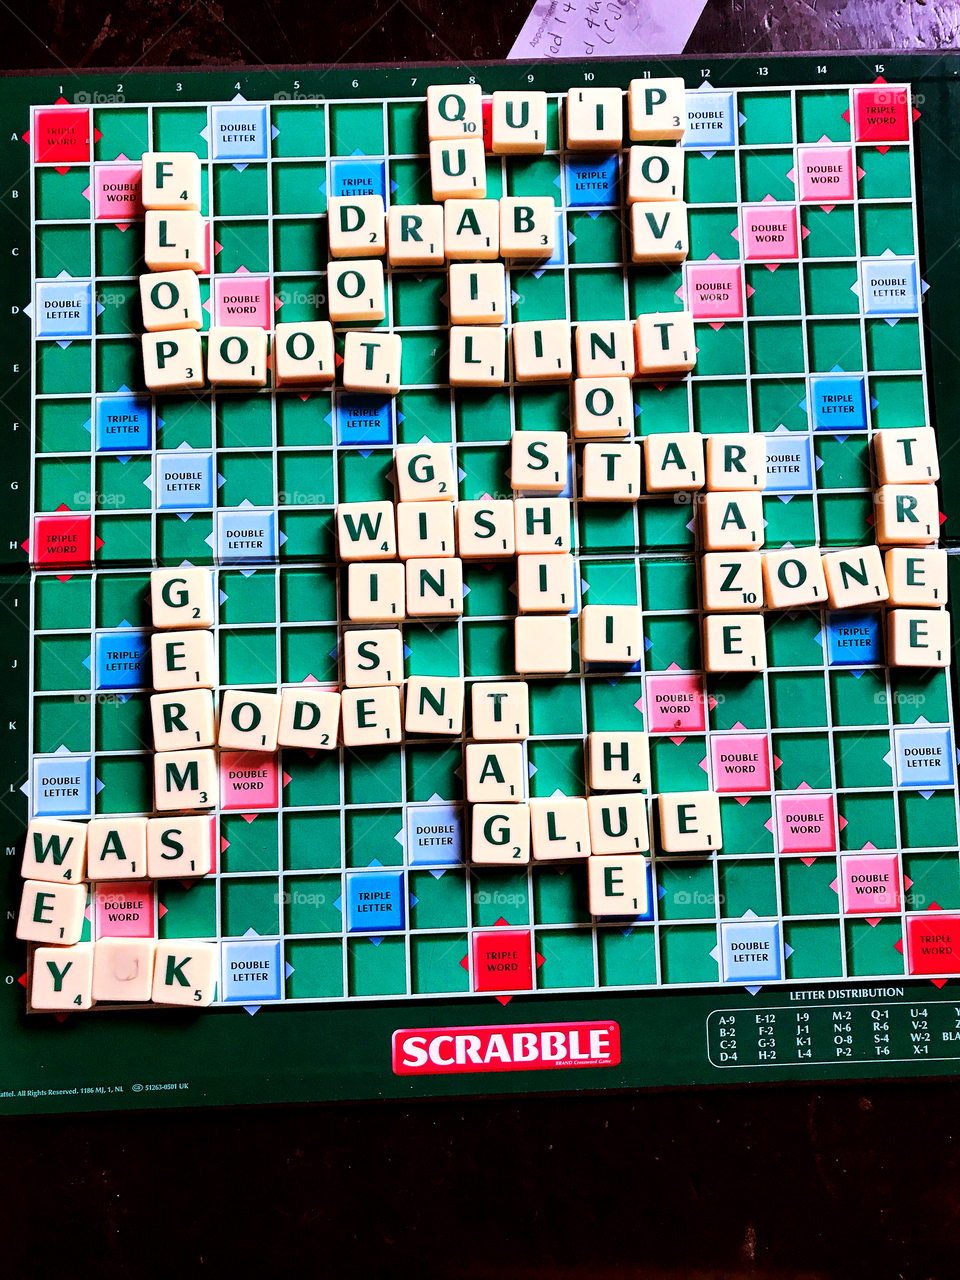 Today’s family game scrabble 